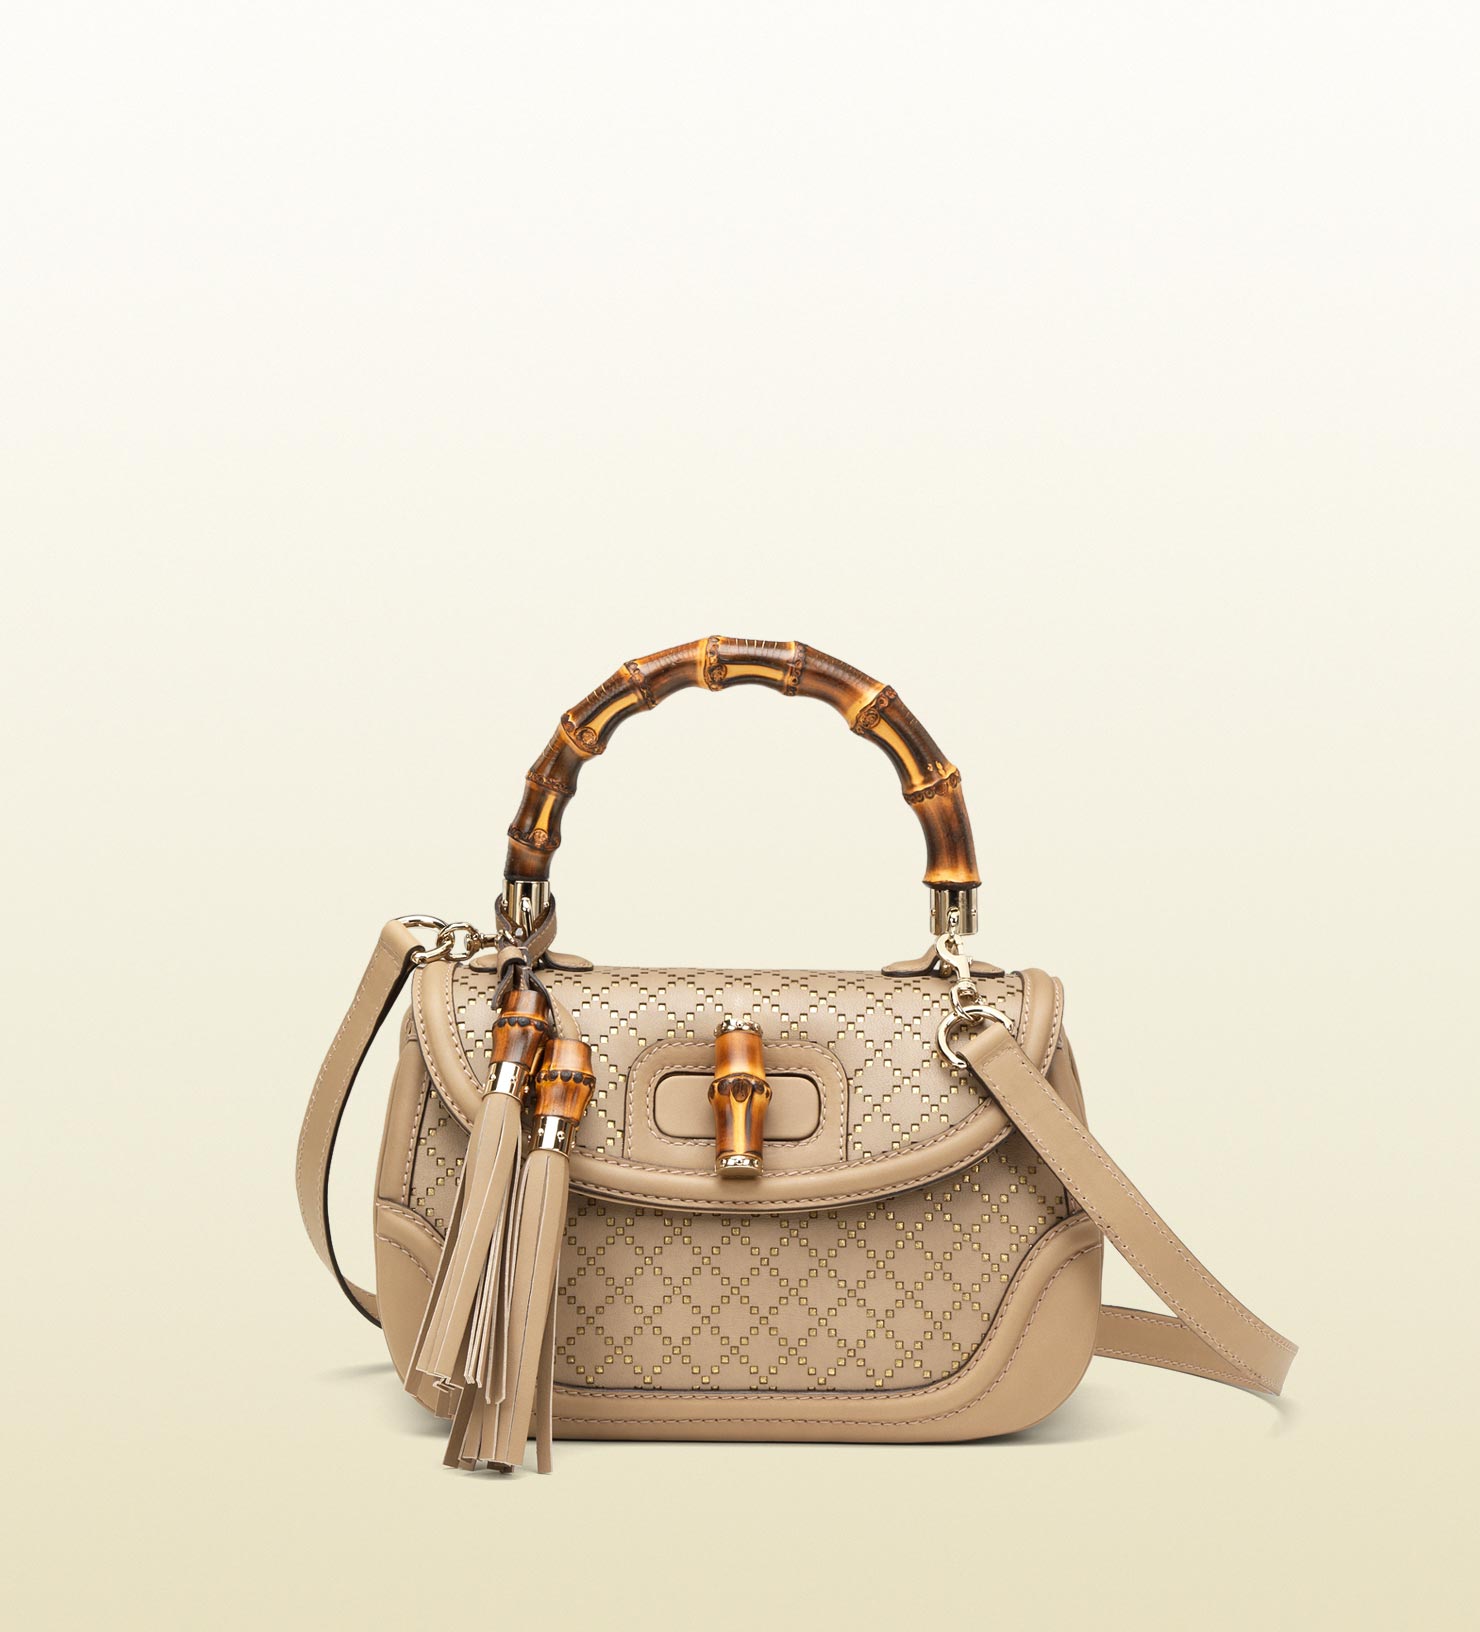 Lyst - Gucci New Bamboo Bi-color Diamante Leather Top Handle Bag in Natural